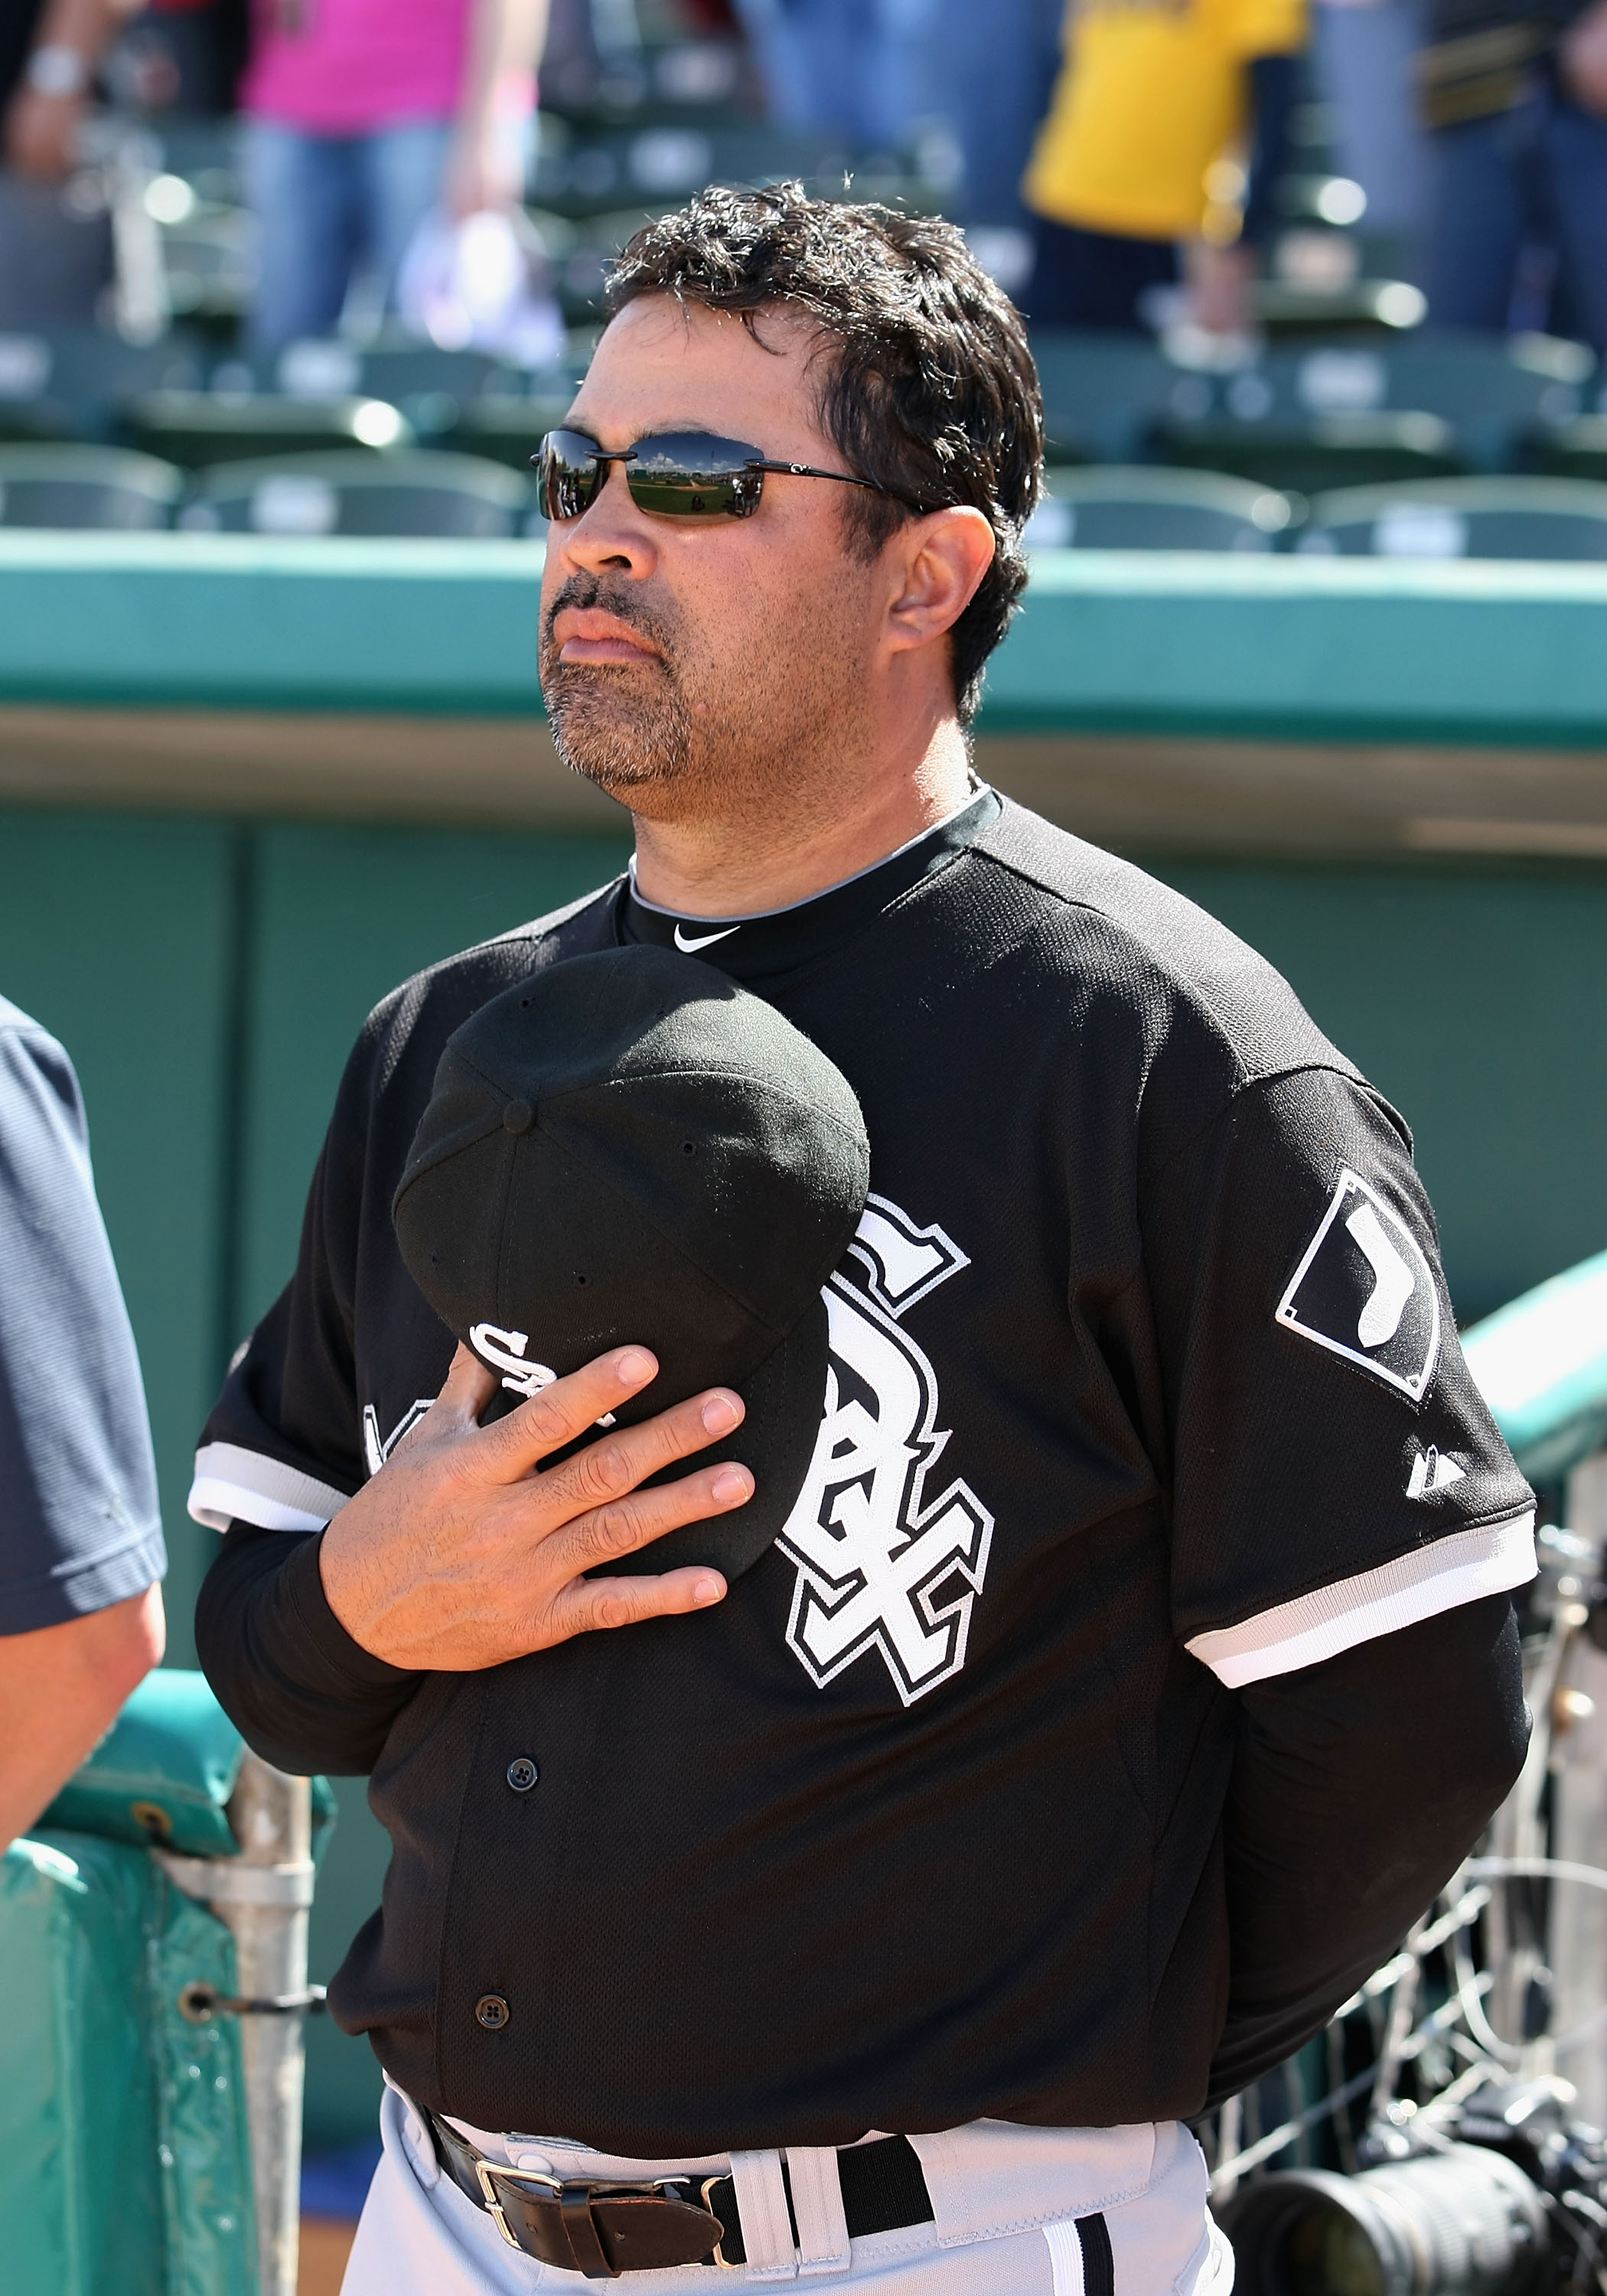 Chicago White Sox manager Ozzie Guillen (R) argues with home plate